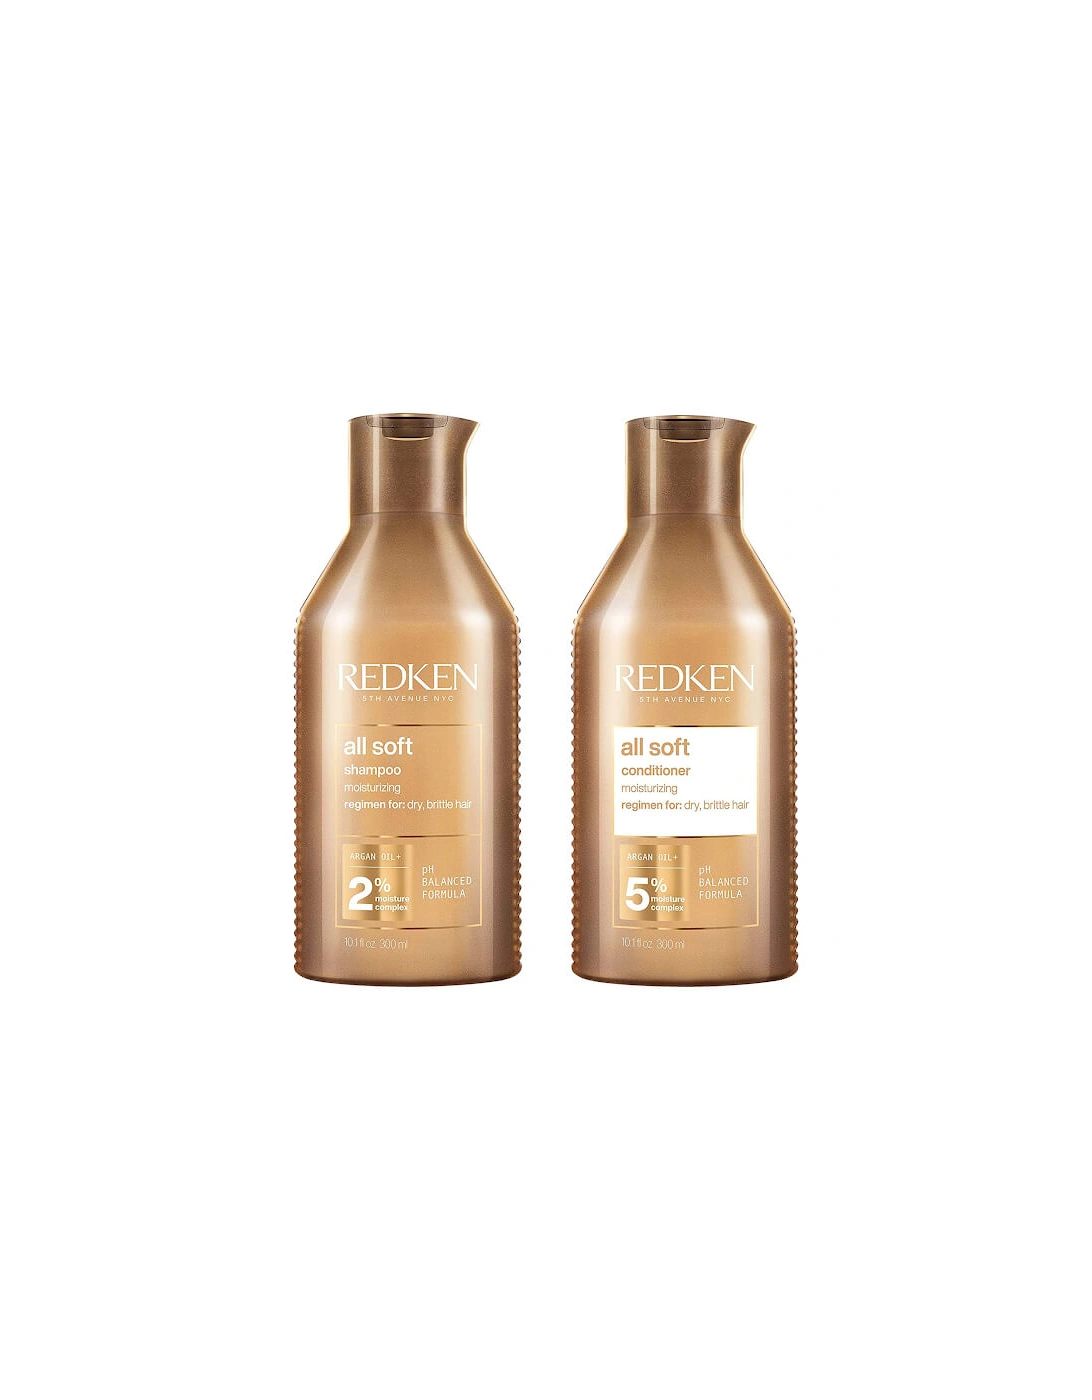 All Soft Moisturising Shampoo and Conditioner 300ml Bundle For Dry Hair - Redken, 2 of 1